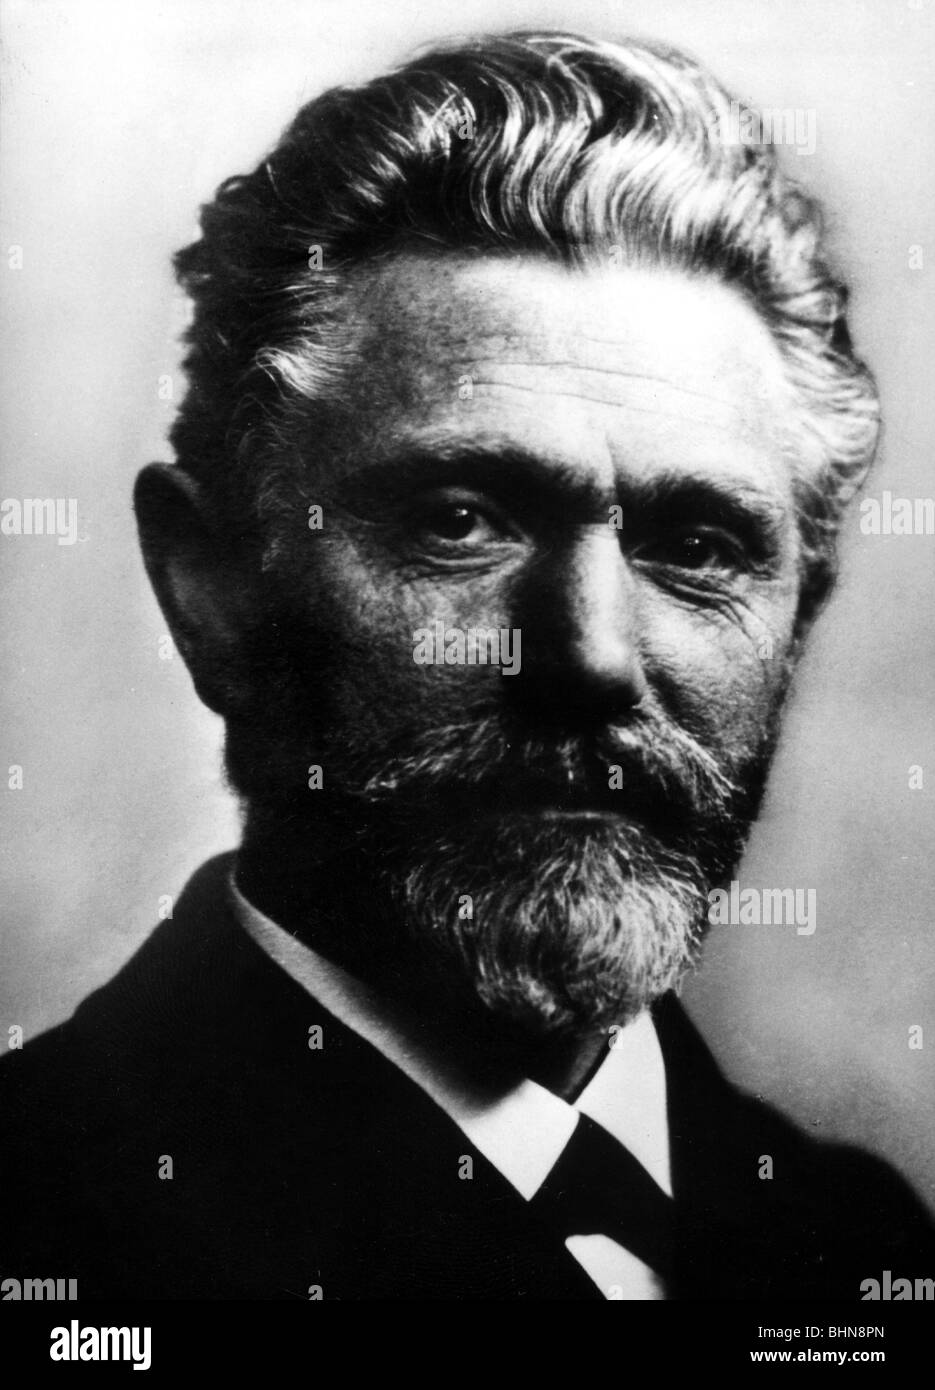 Bebel, August, 22.2.1840 - 13.8.1913, German politician and publicist, member of the German Reichstag 1871 - 1881 and 1883 - 1913, portrait, circa 1895, Stock Photo